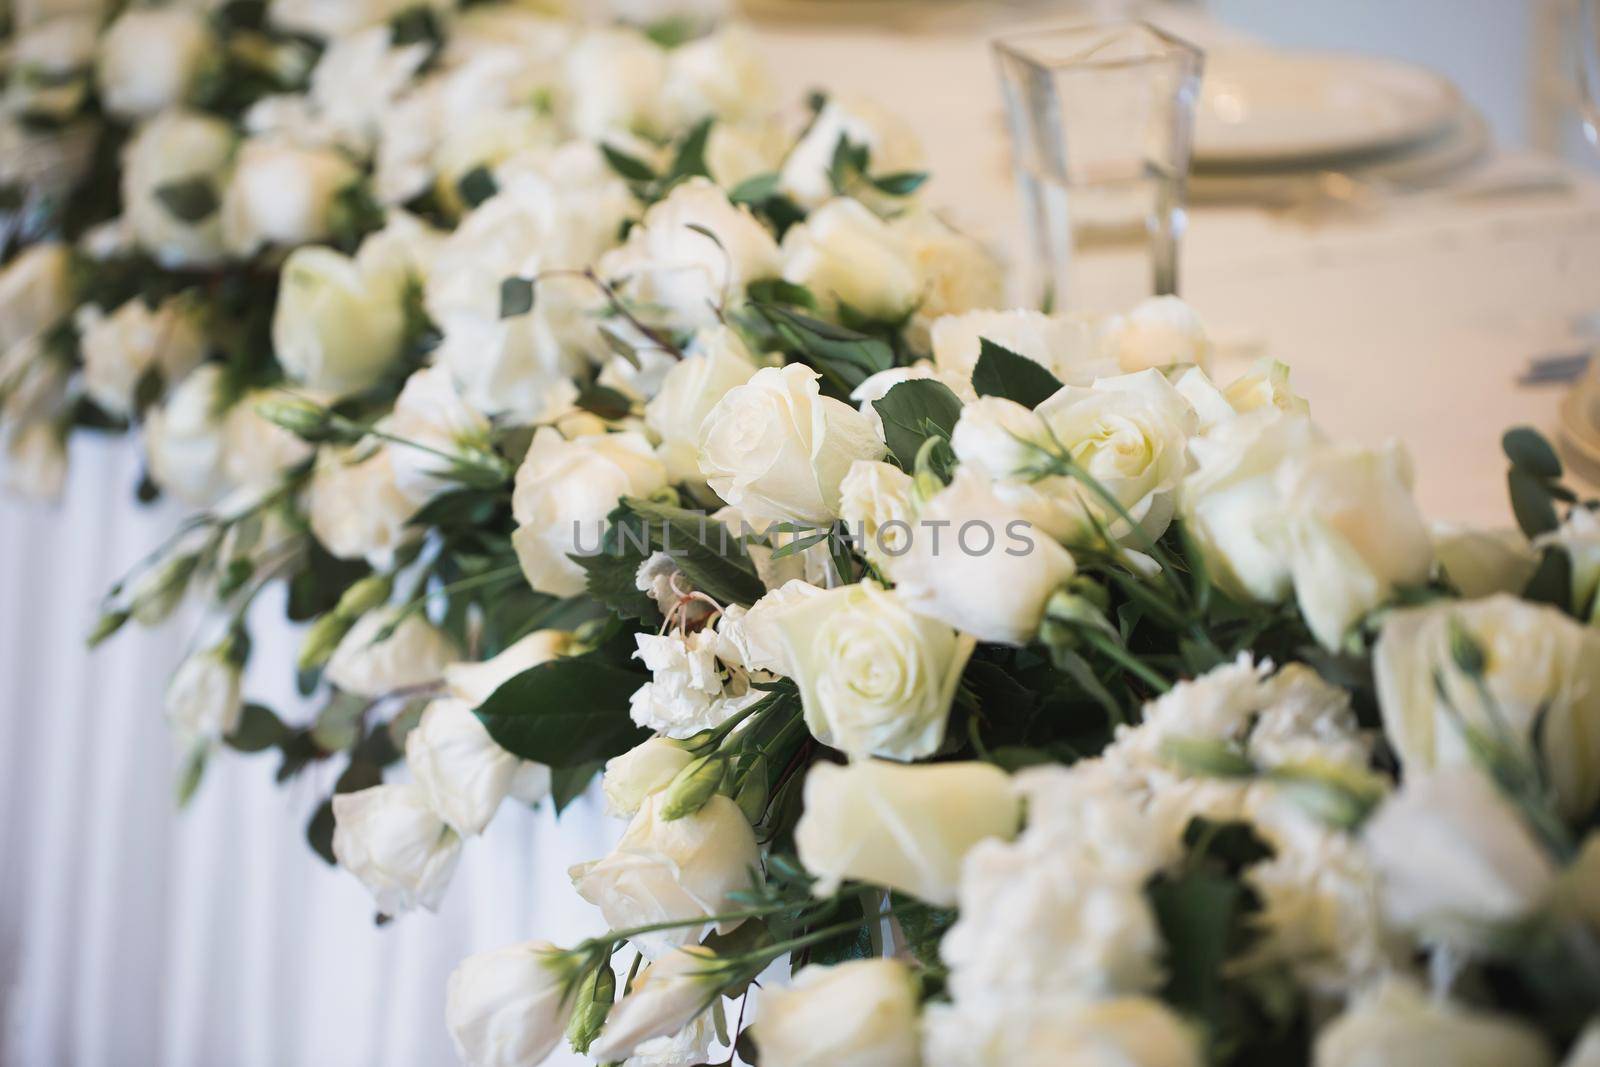 Details. Wedding ceremony in the open air of fresh flowers, with candles. Gentle and beautiful wedding decor for newlyweds.